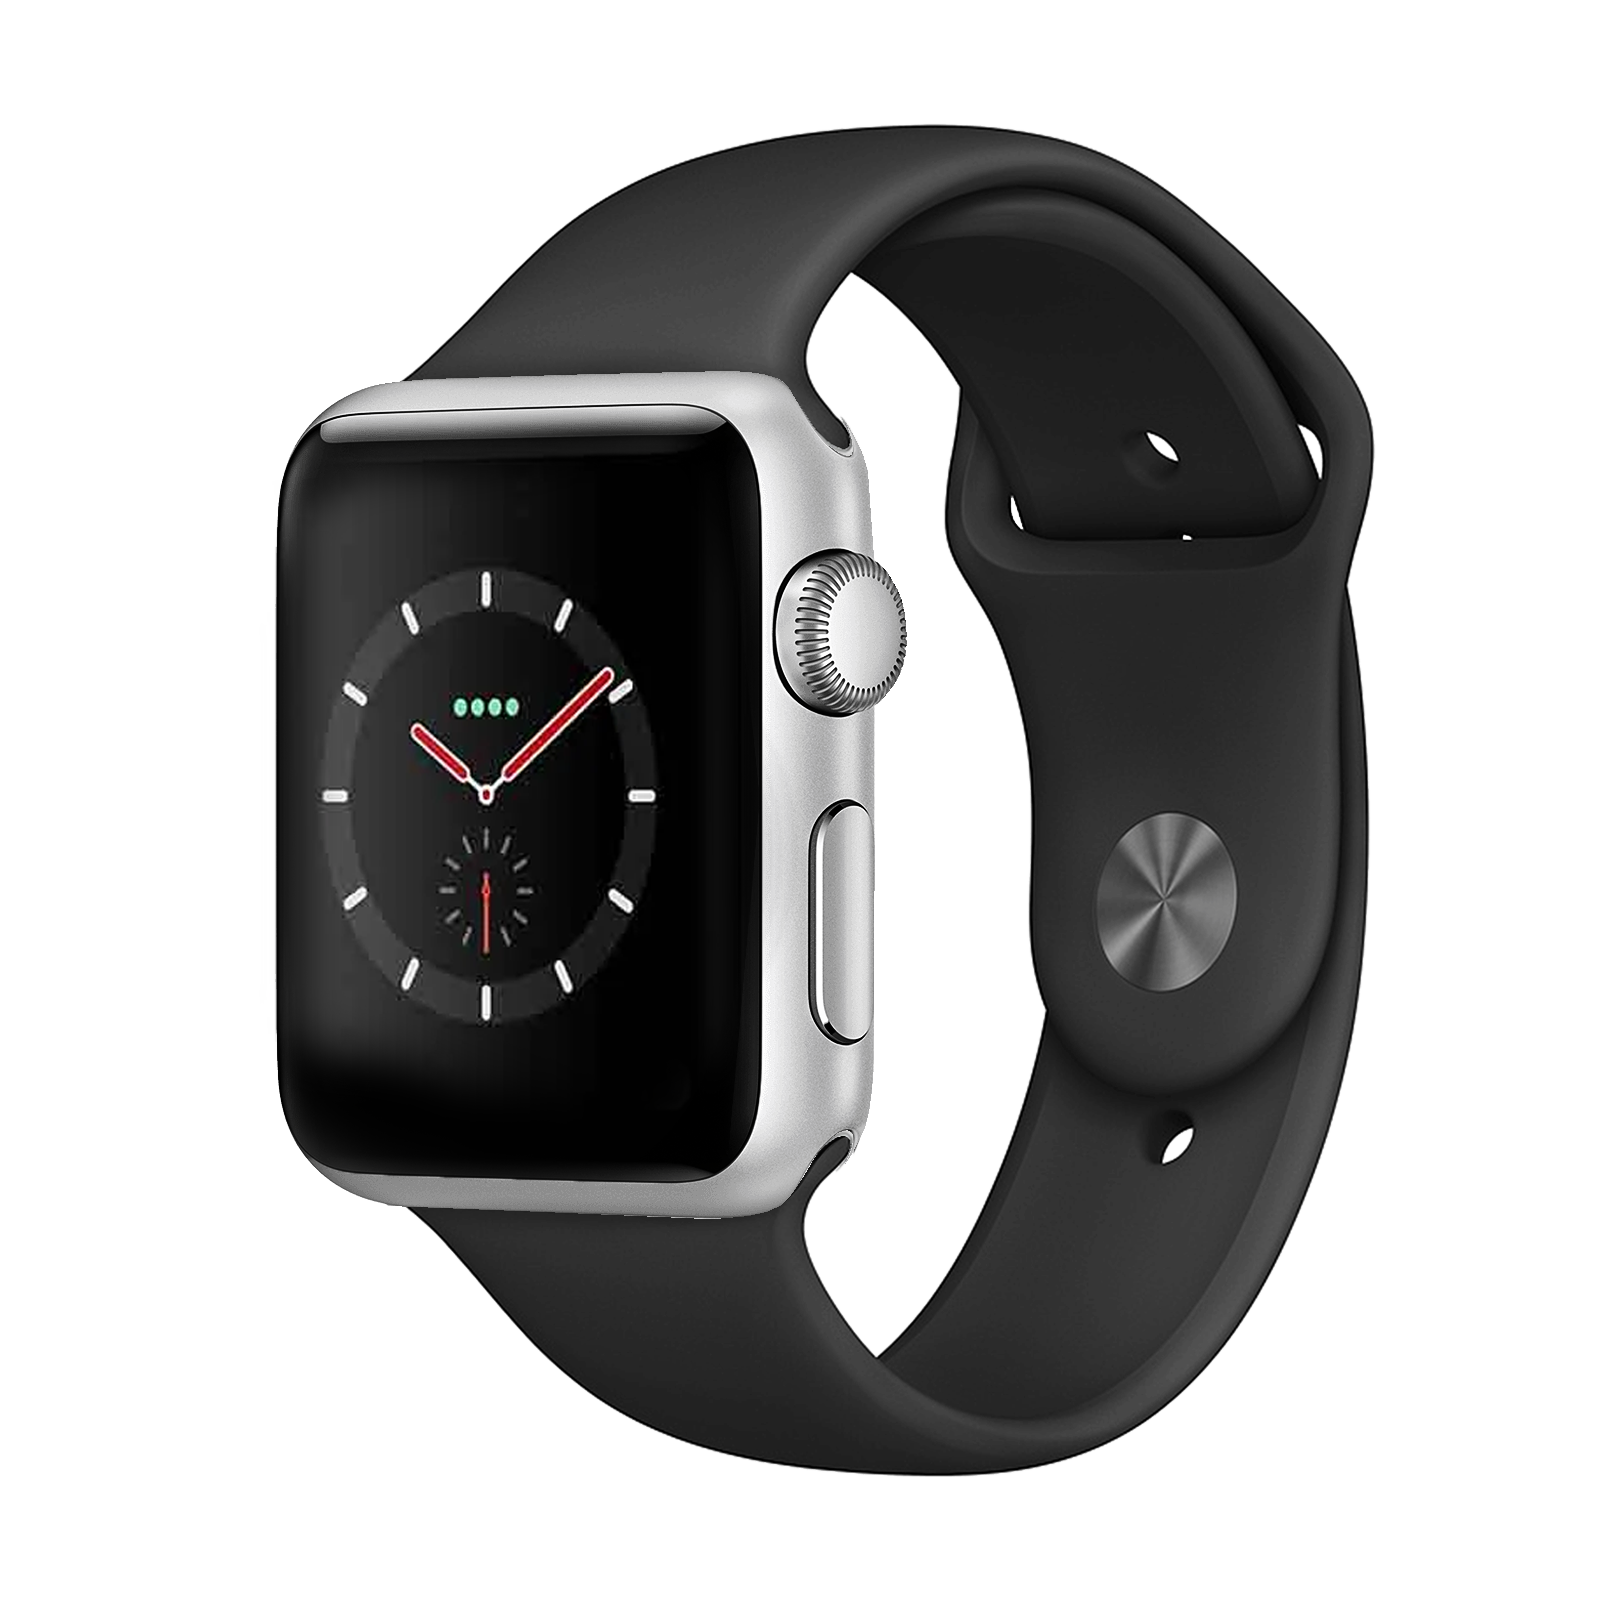 Apple Watch Series 3 Stainless 42mm Silver Pristine - WiFi